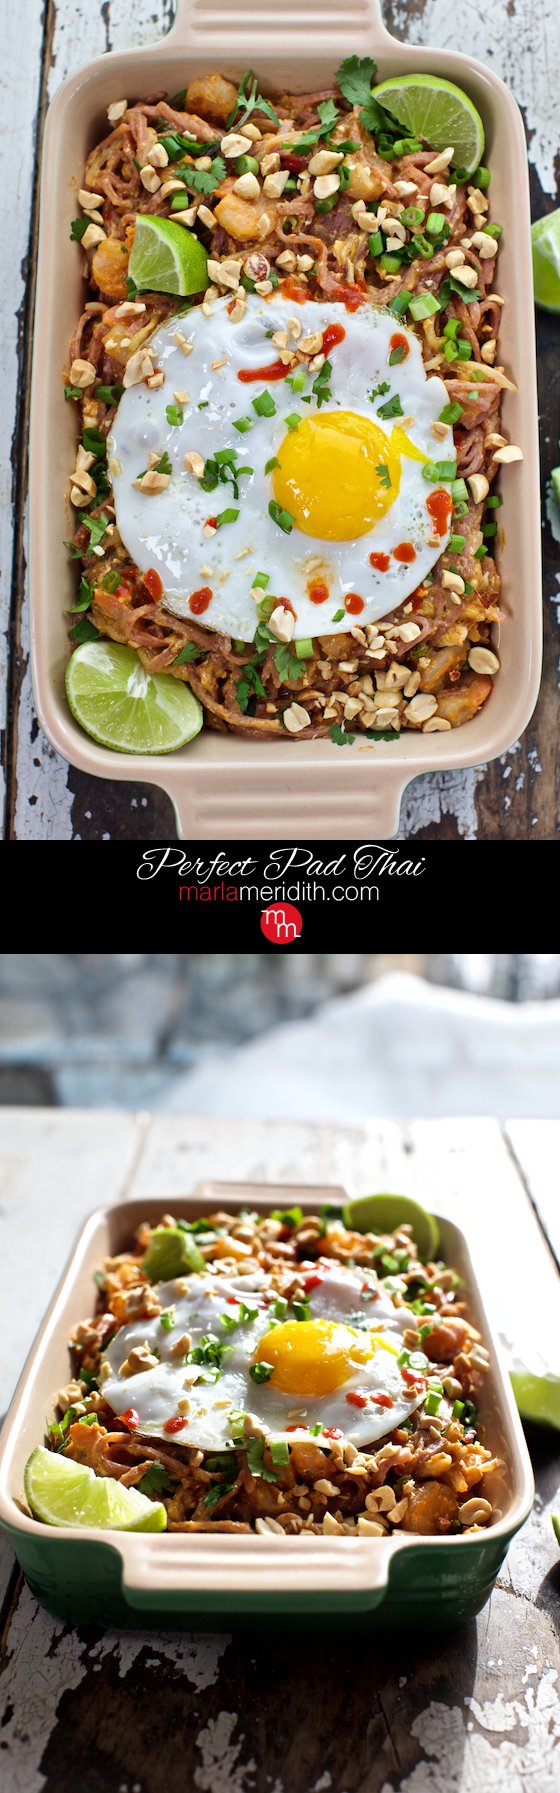 This Perfect Pad Thai recipe is the BEST meal for busy week nights! MarlaMeridith.com ( @marlameridith )